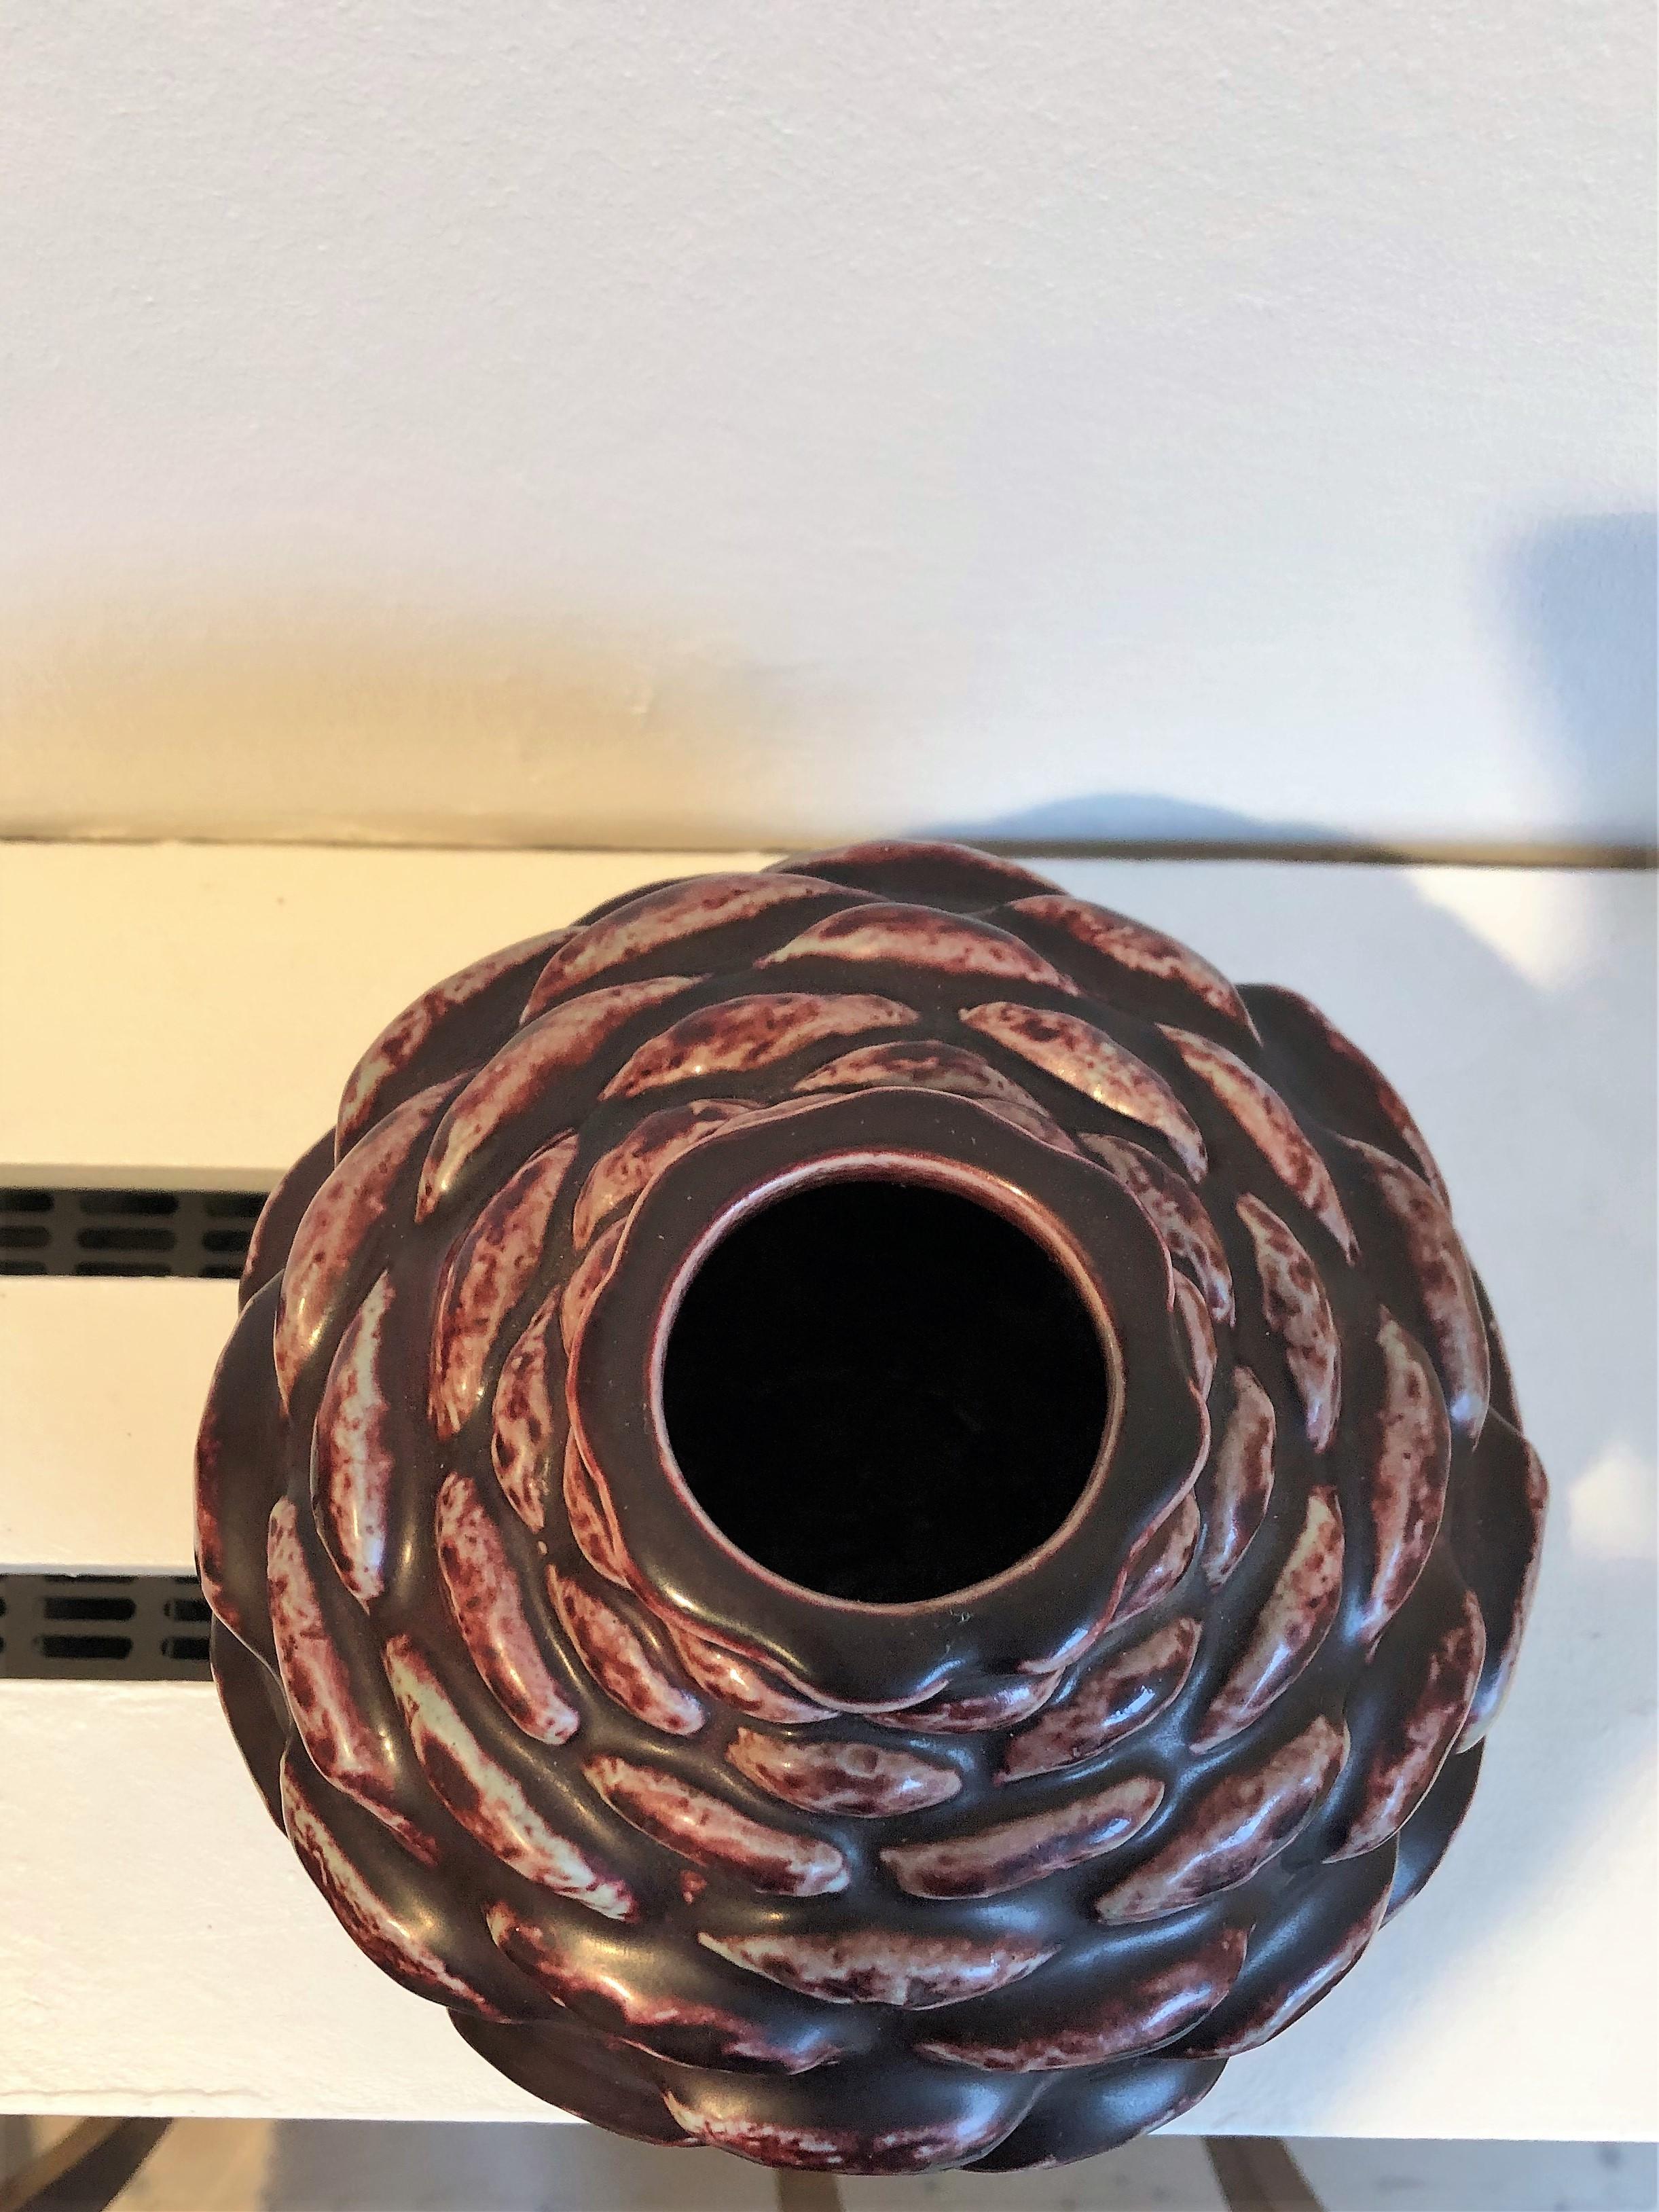 Mid-20th Century Axel Salto Vase in 'Budding' Style and Oxblood Glaze for Royal Copenhagen, 1950s